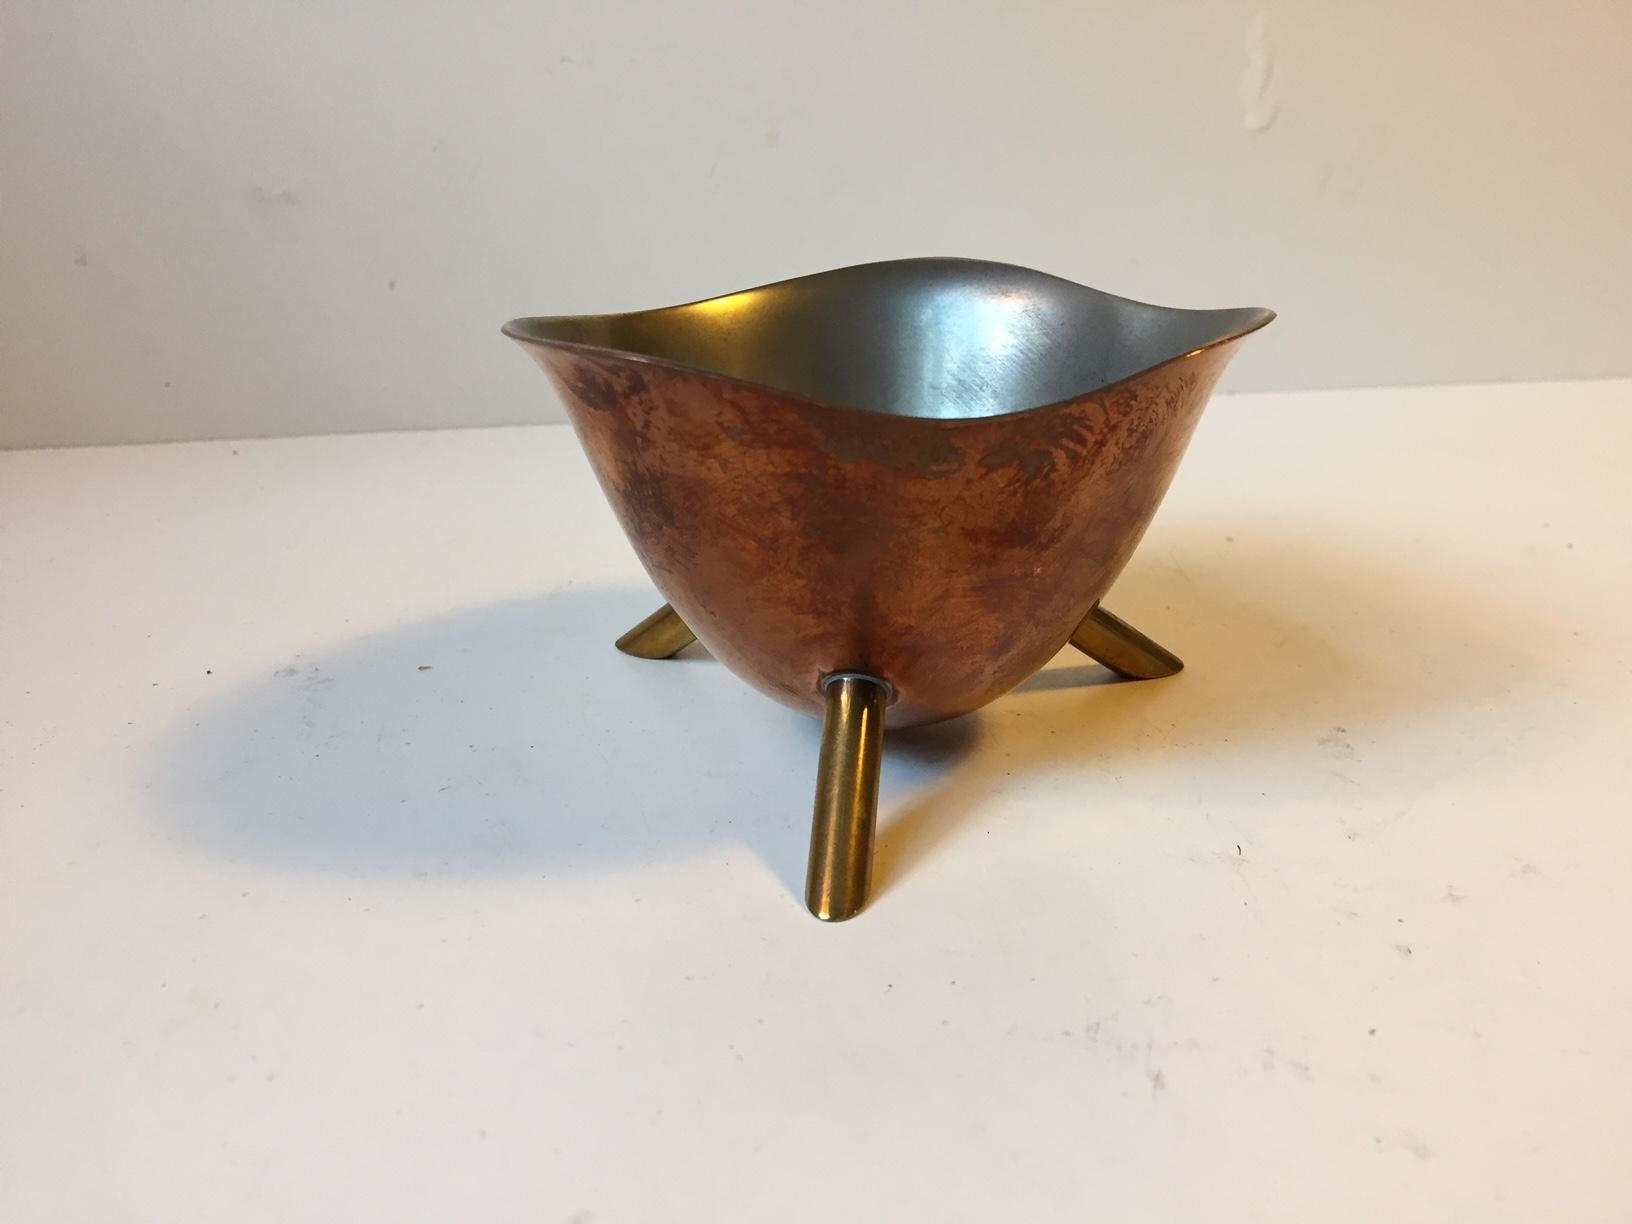 A small organically shaped nut or candy bowl fashioned out of a bended copper plate that has been linned with pewter. The 'legs' are made from brass. It was designed anonymously in Scandinavia during the 1950s in a style reminiscent of Henning